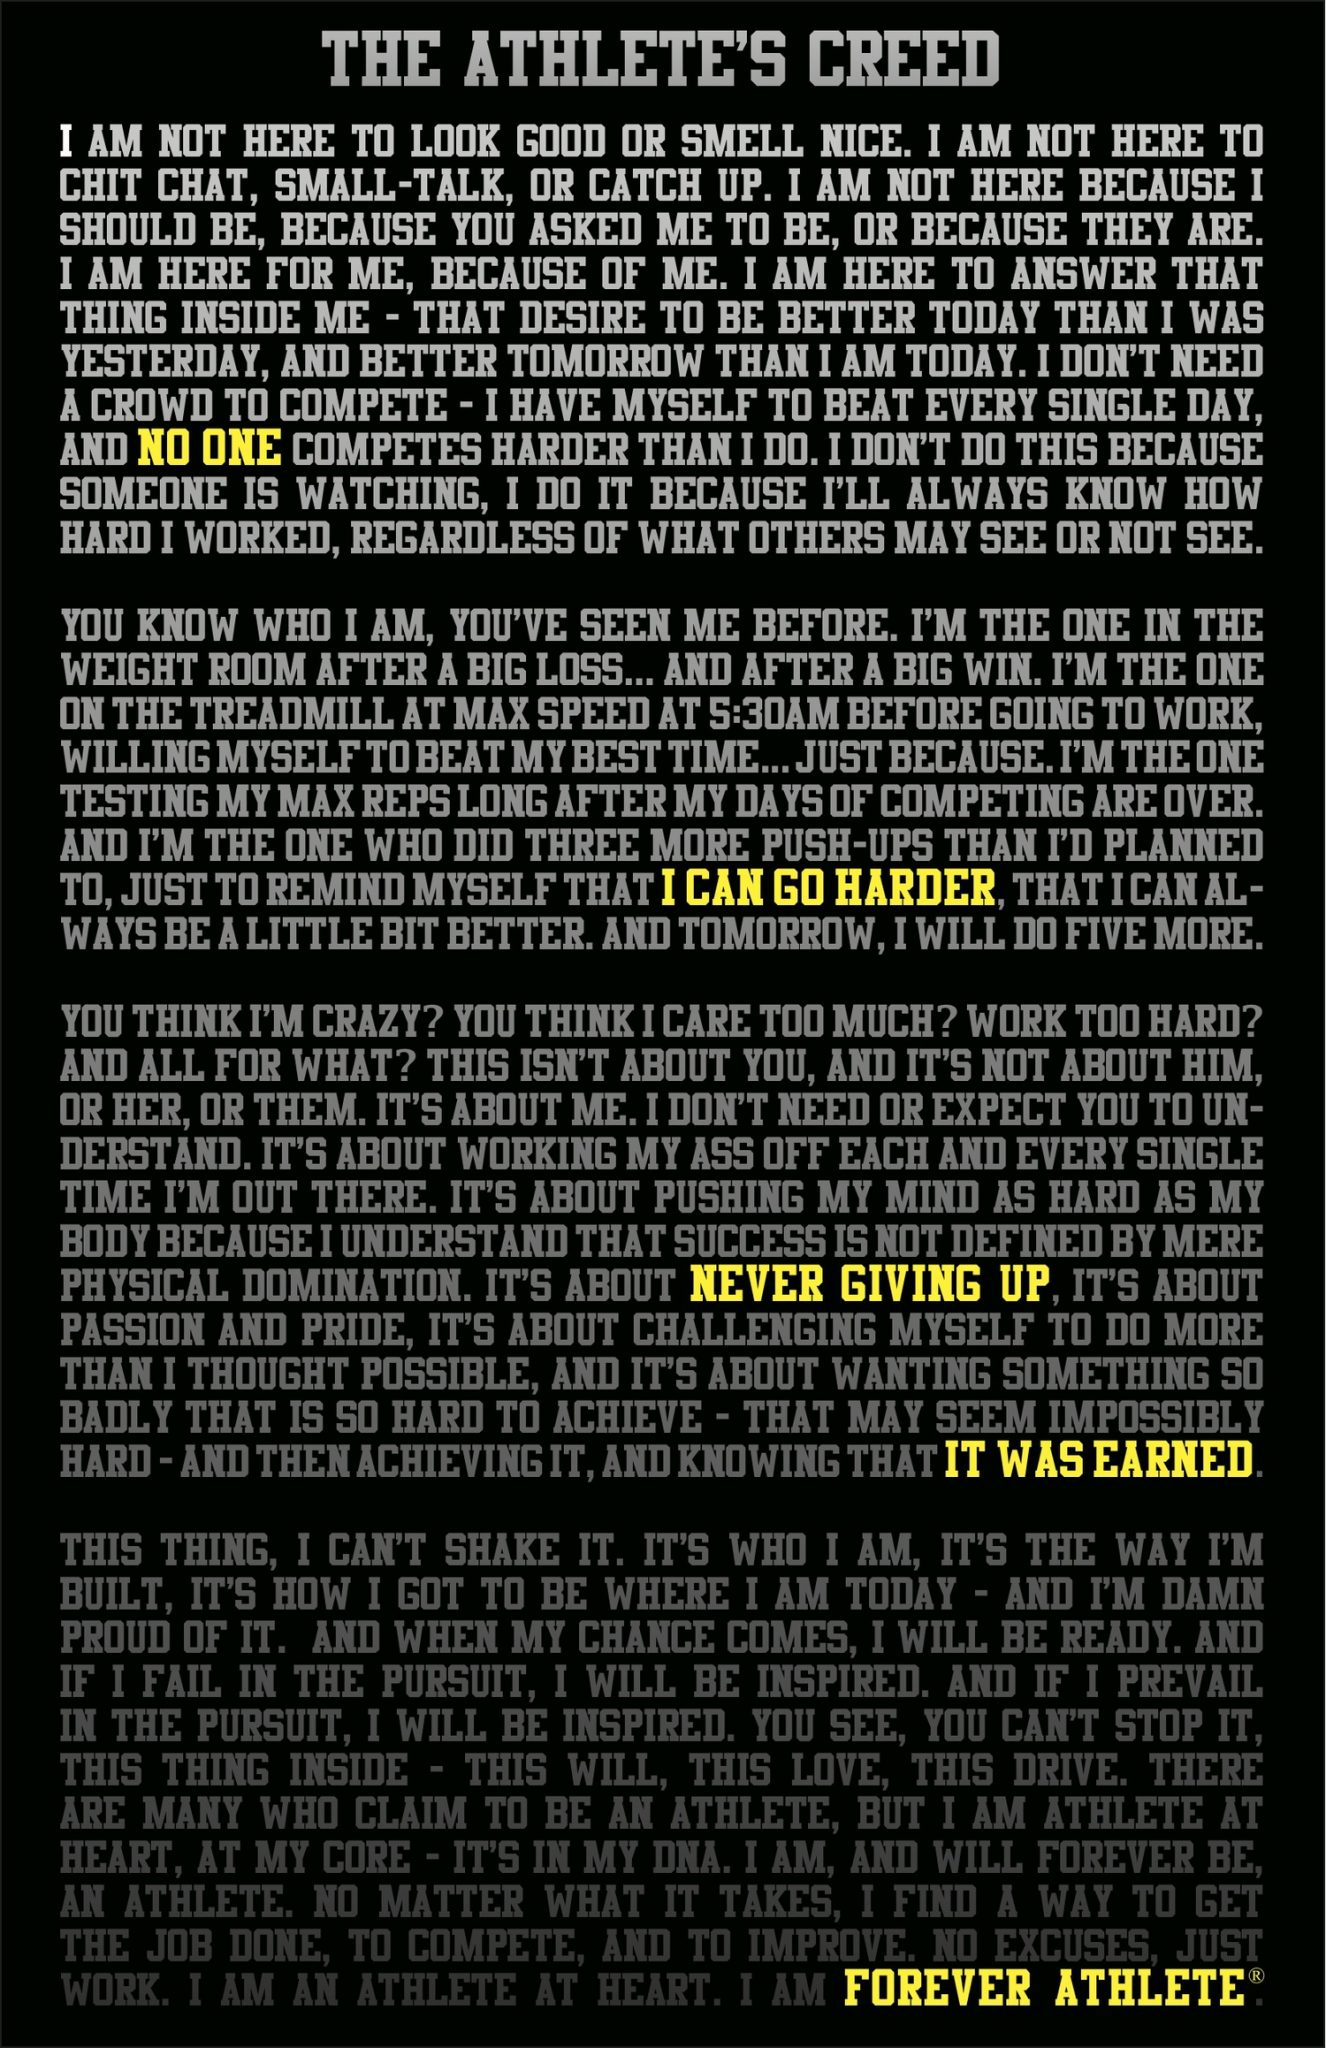 Motivational Wallpaper The Athlete S Creed By Sarah - Motivational Wallpapers For Athletes - HD Wallpaper 